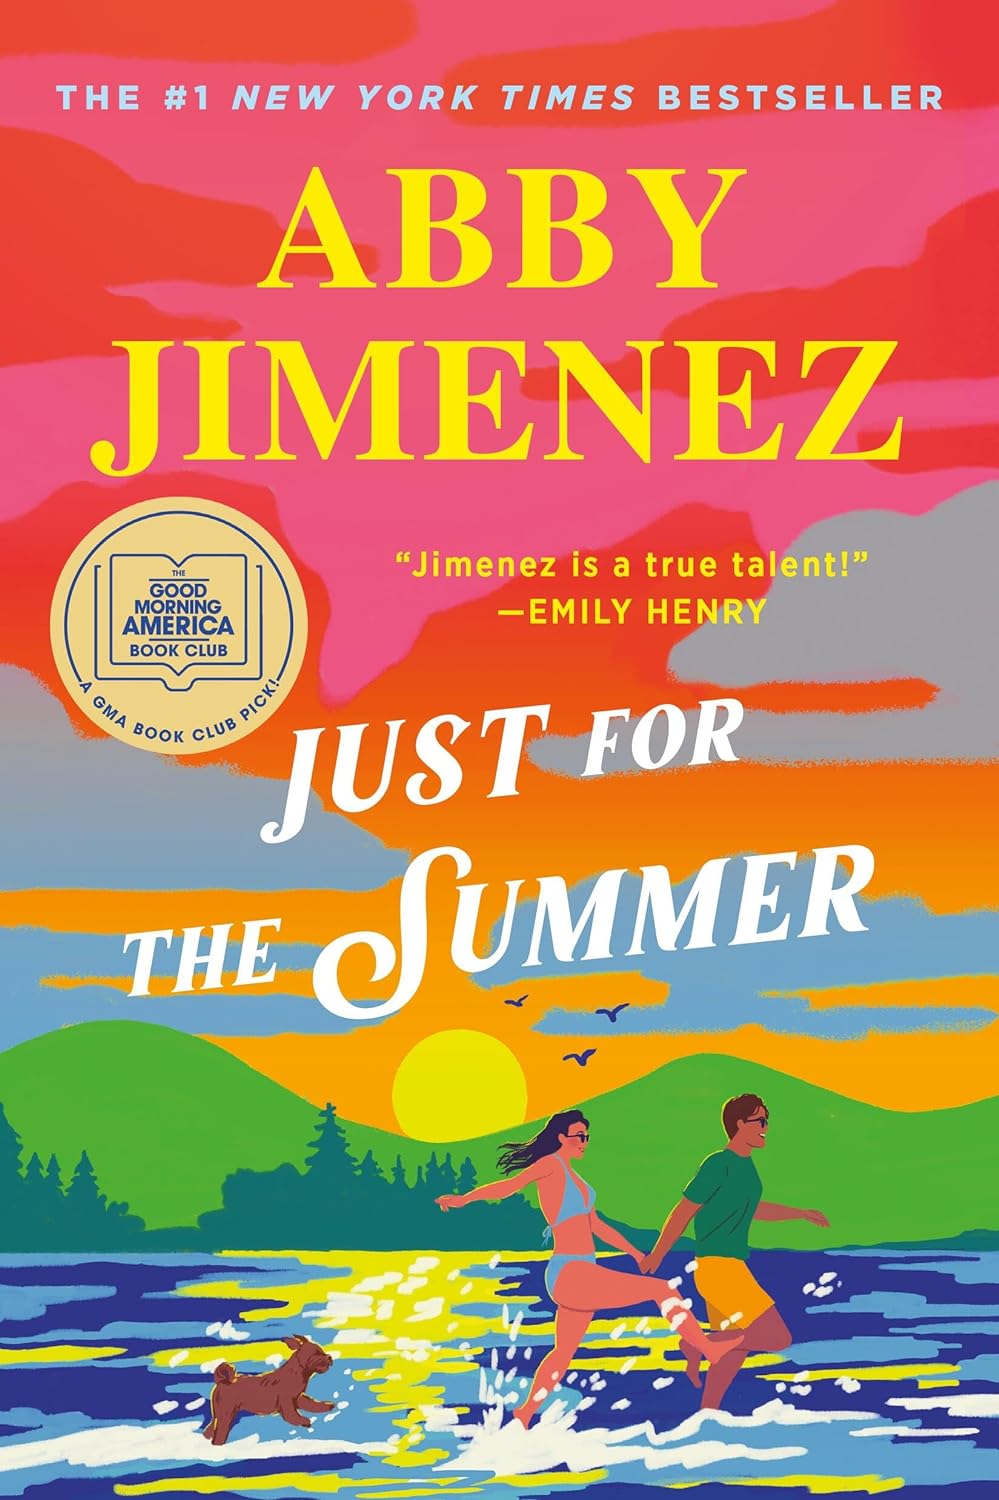 book cover for "Just for the Summer"